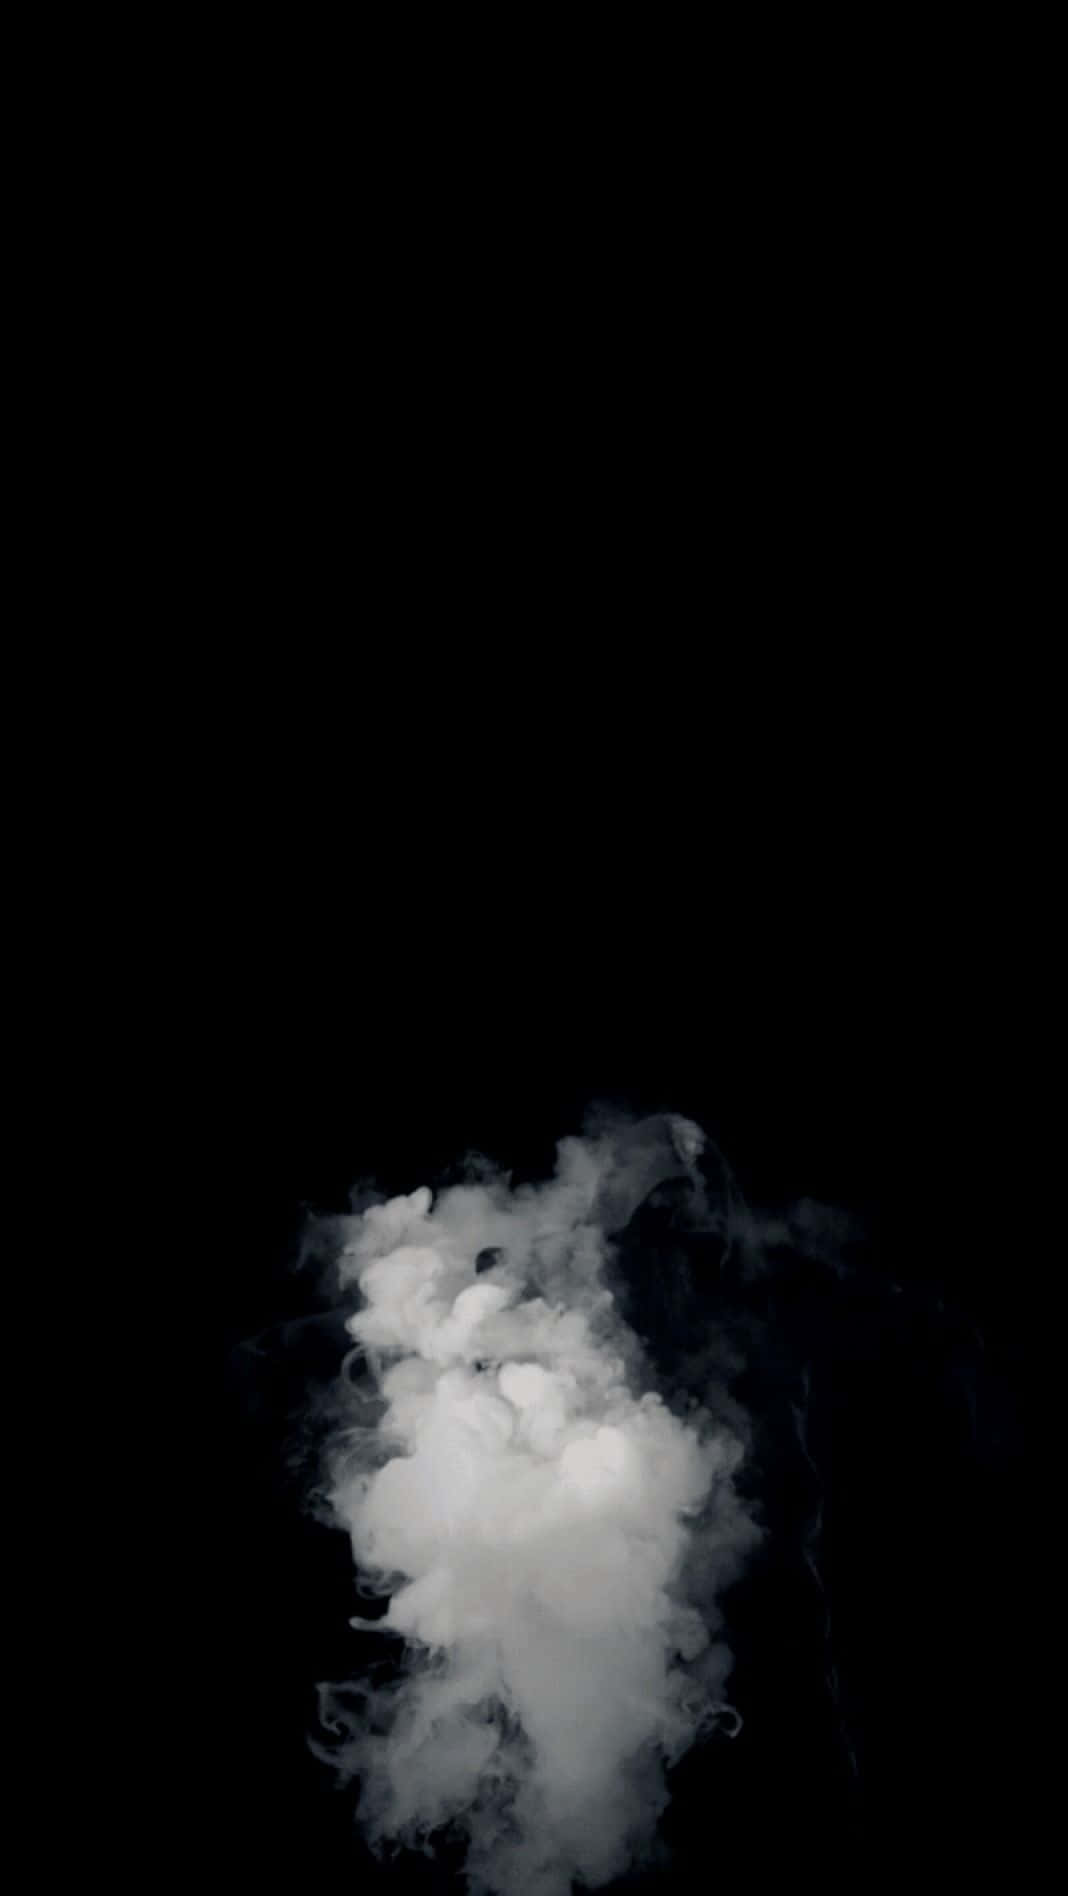 A White Cloud Floating In The Air On A Black Background Wallpaper